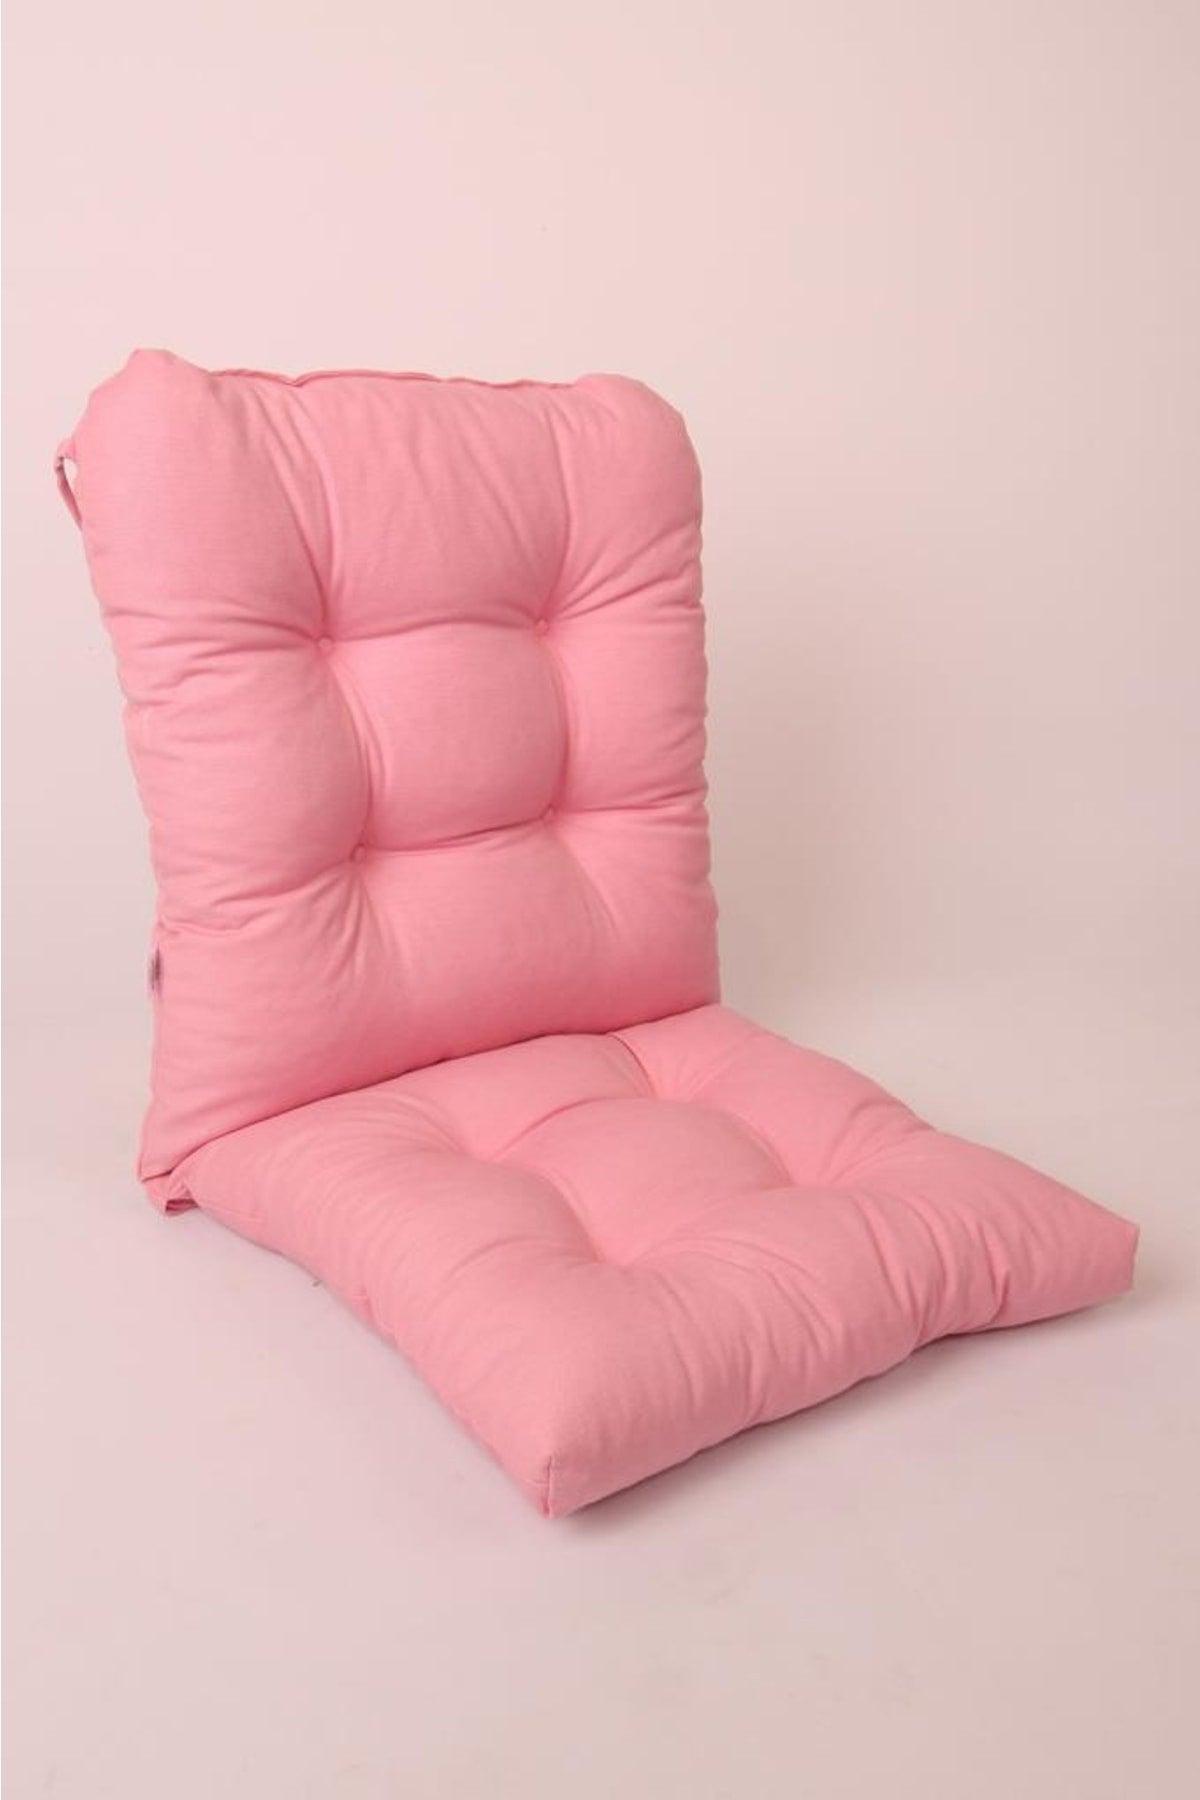 Neva Pofidik Pink Backed Chair Cushion Specially Stitched Laced 44x94 Cm - Swordslife